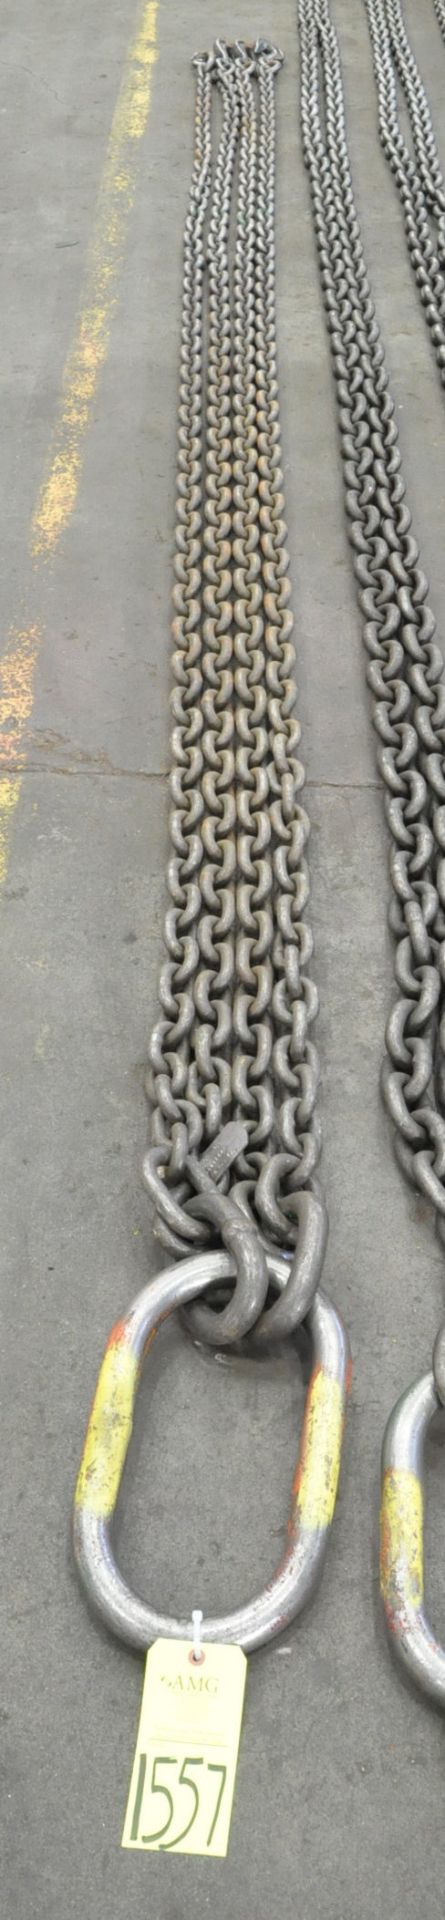 5/8" Link x 16' 6" Long 4-Hook Chain Sling, Cert Tag, (G-19), (Yellow Tag)